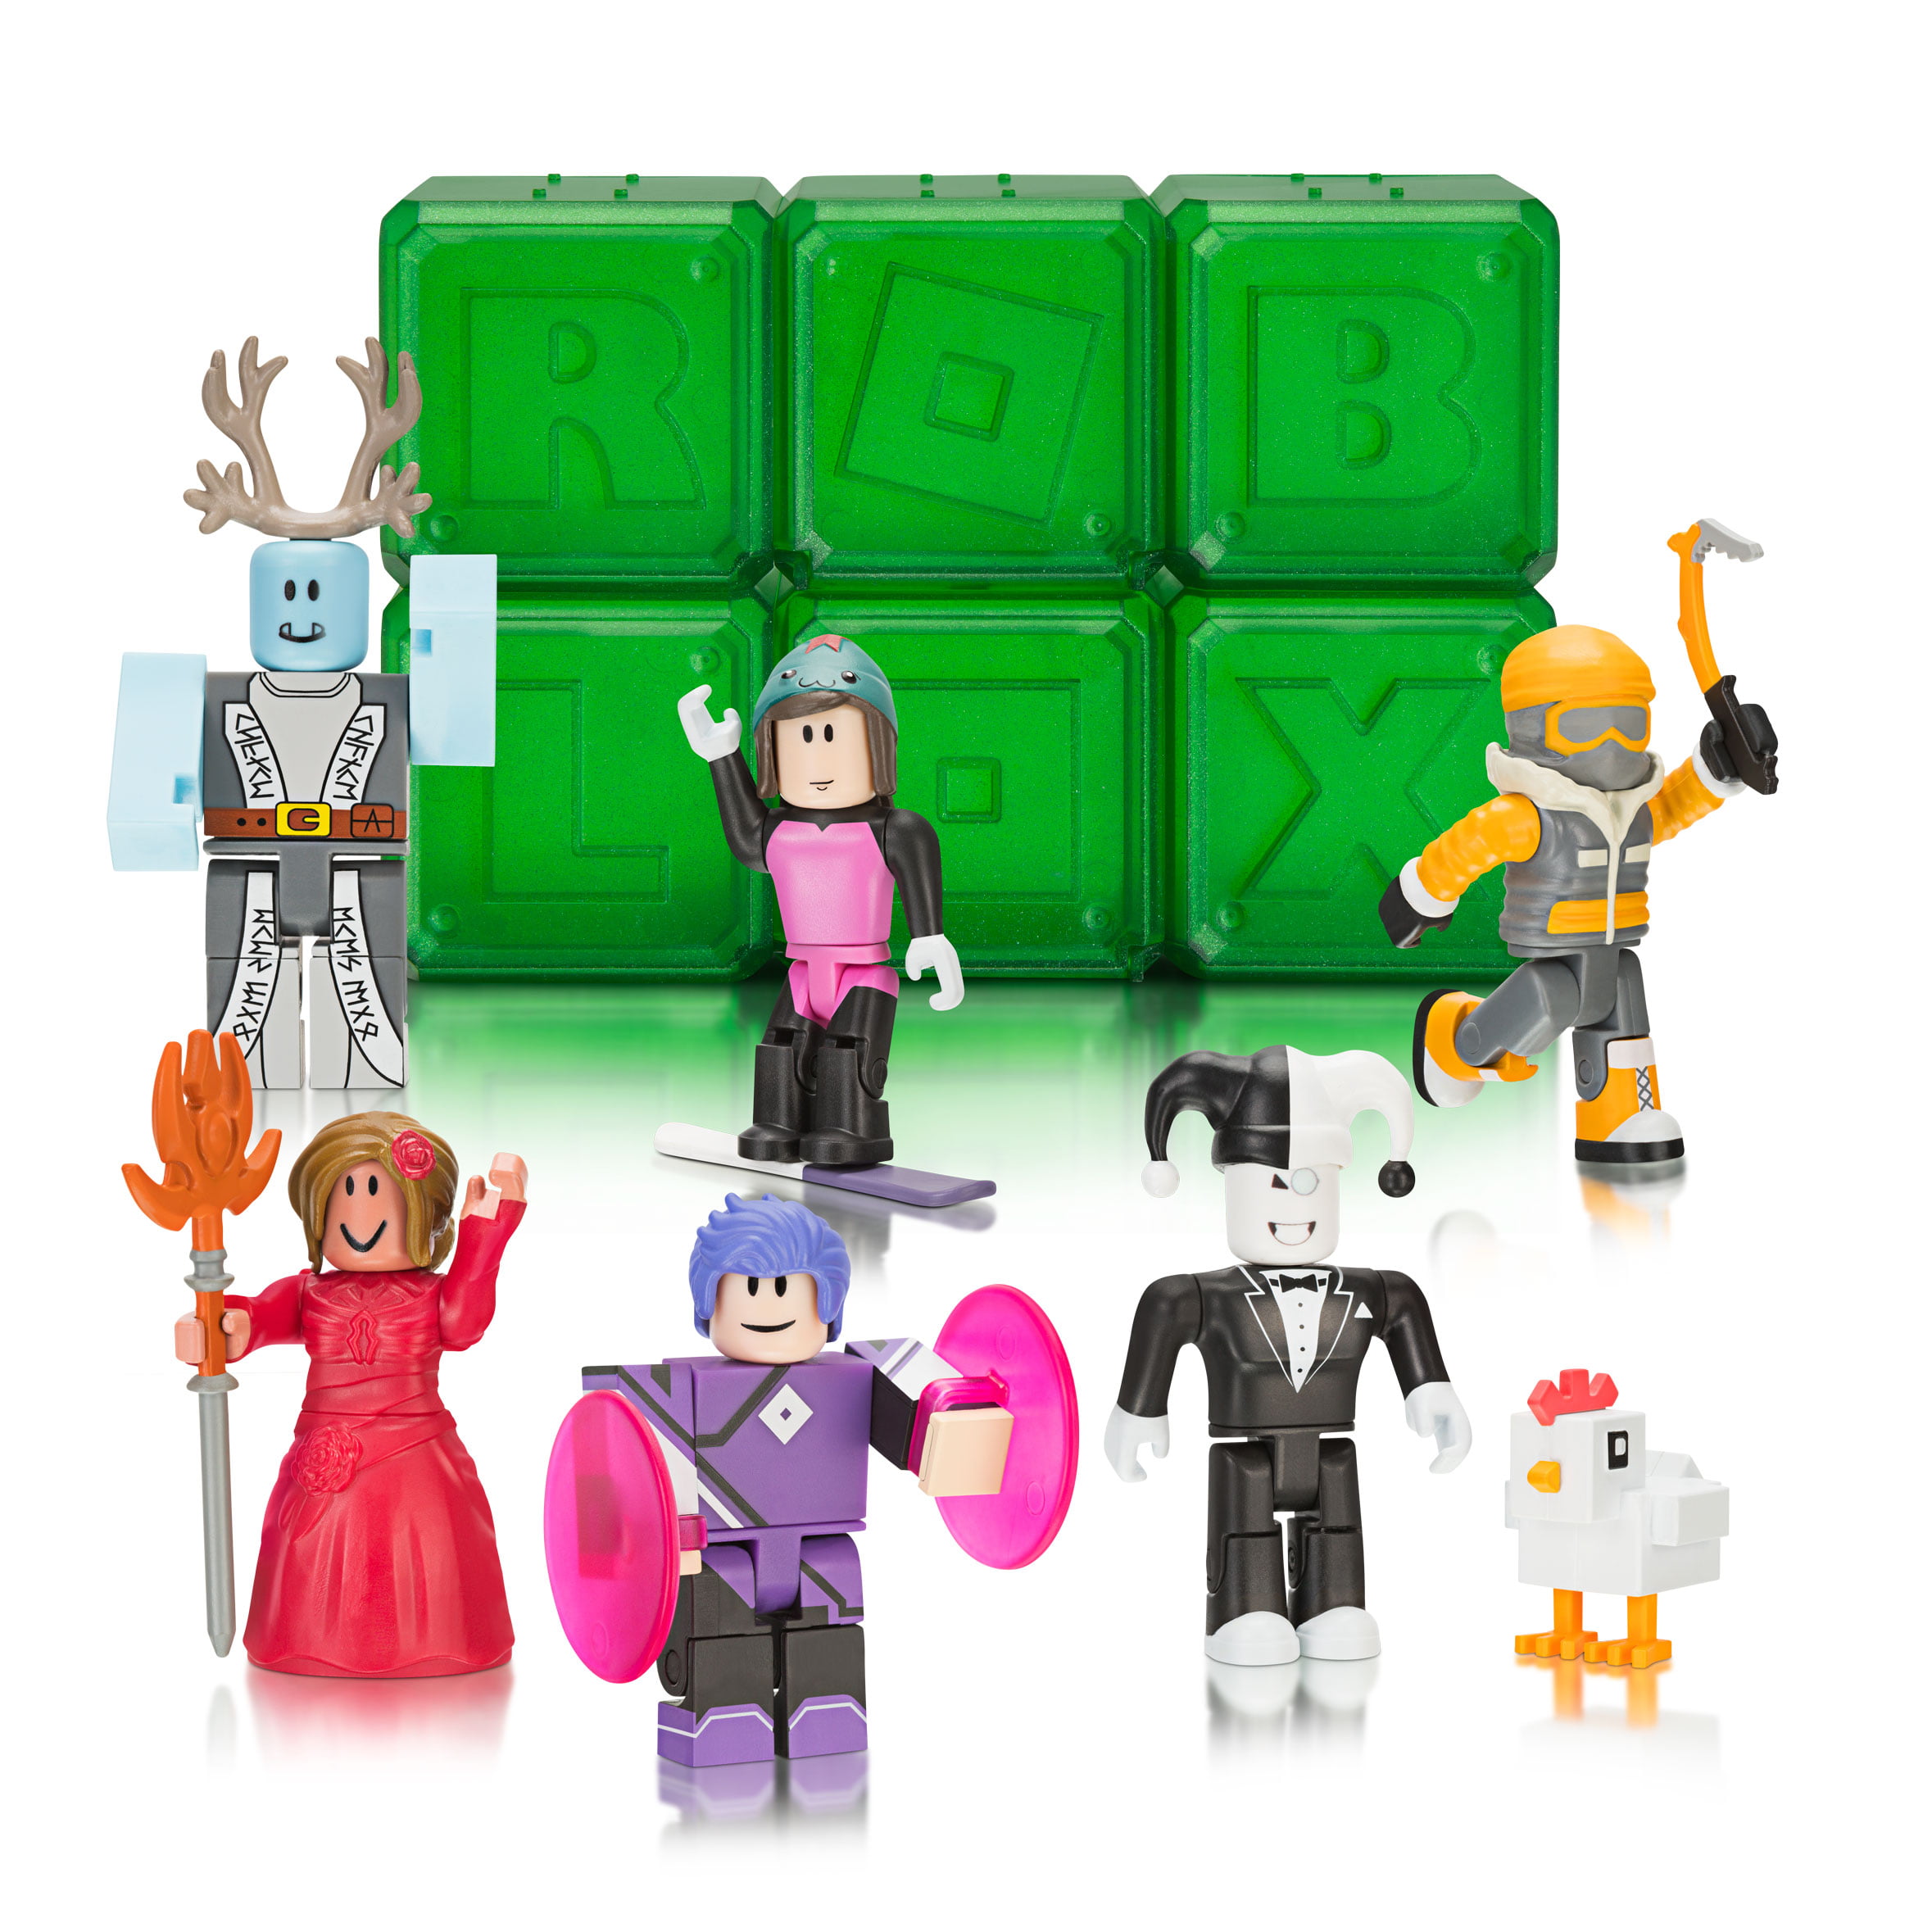 Roblox Celebrity Collection Series 3 Mystery Figure Includes 1 Figure Exclusive Virtual Item Walmart Com Walmart Com - roblox action collection series 6 mystery figure includes 1 figure exclusive virtual item walmart com walmart com